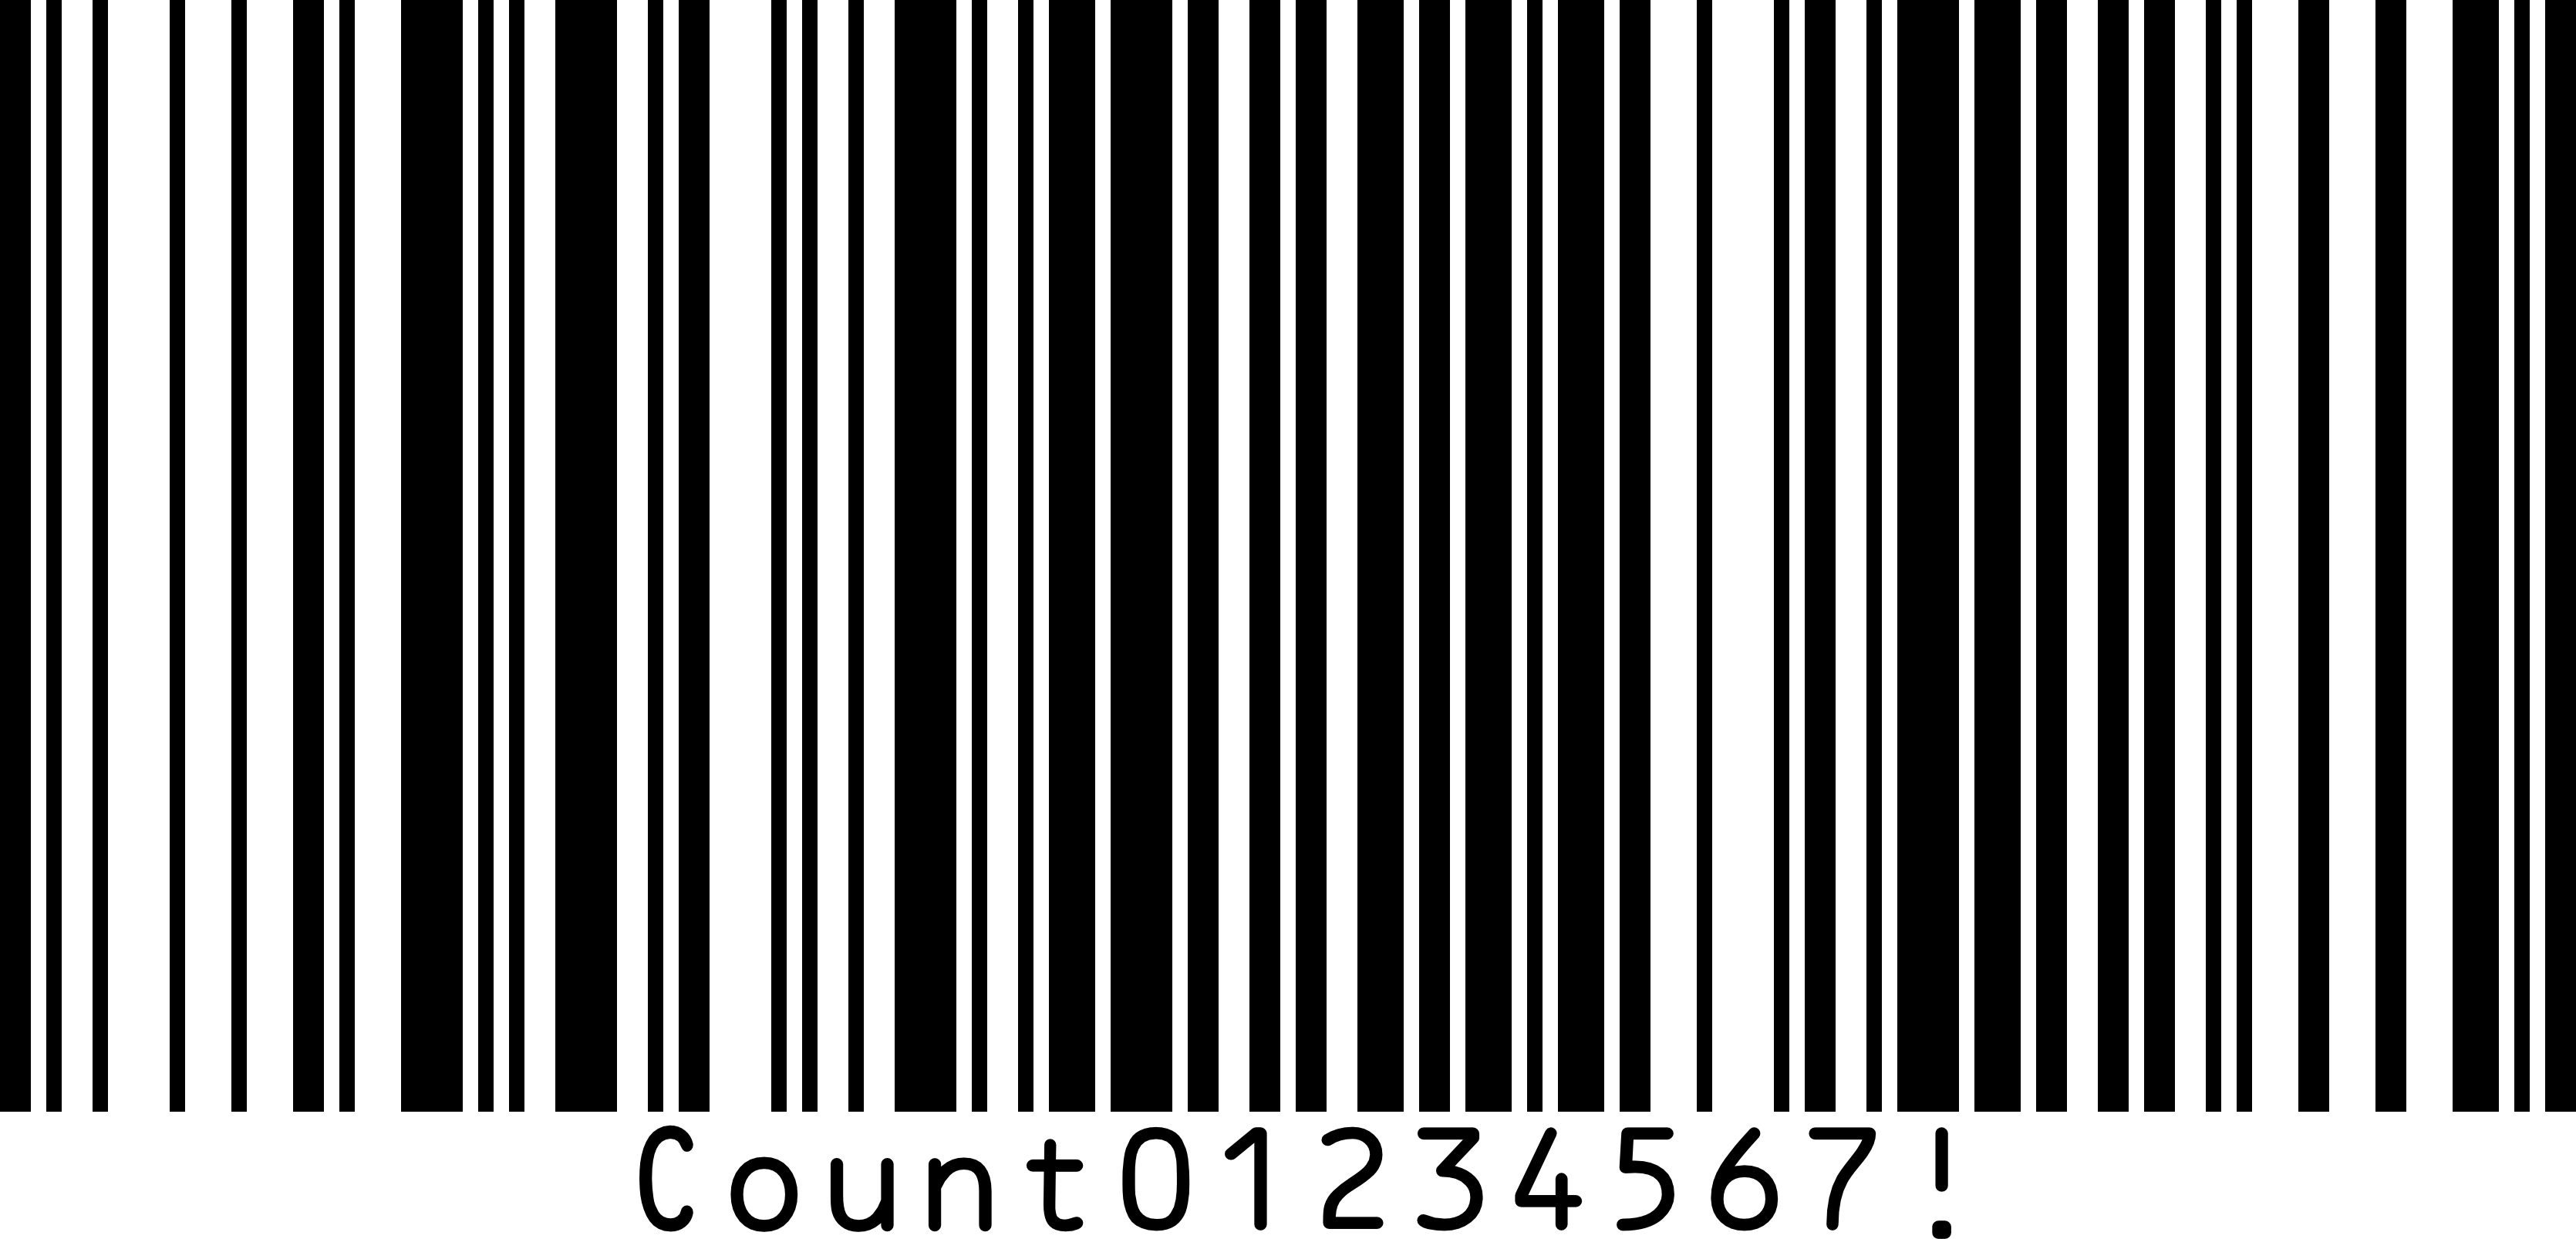 Example of Code128 Barcode